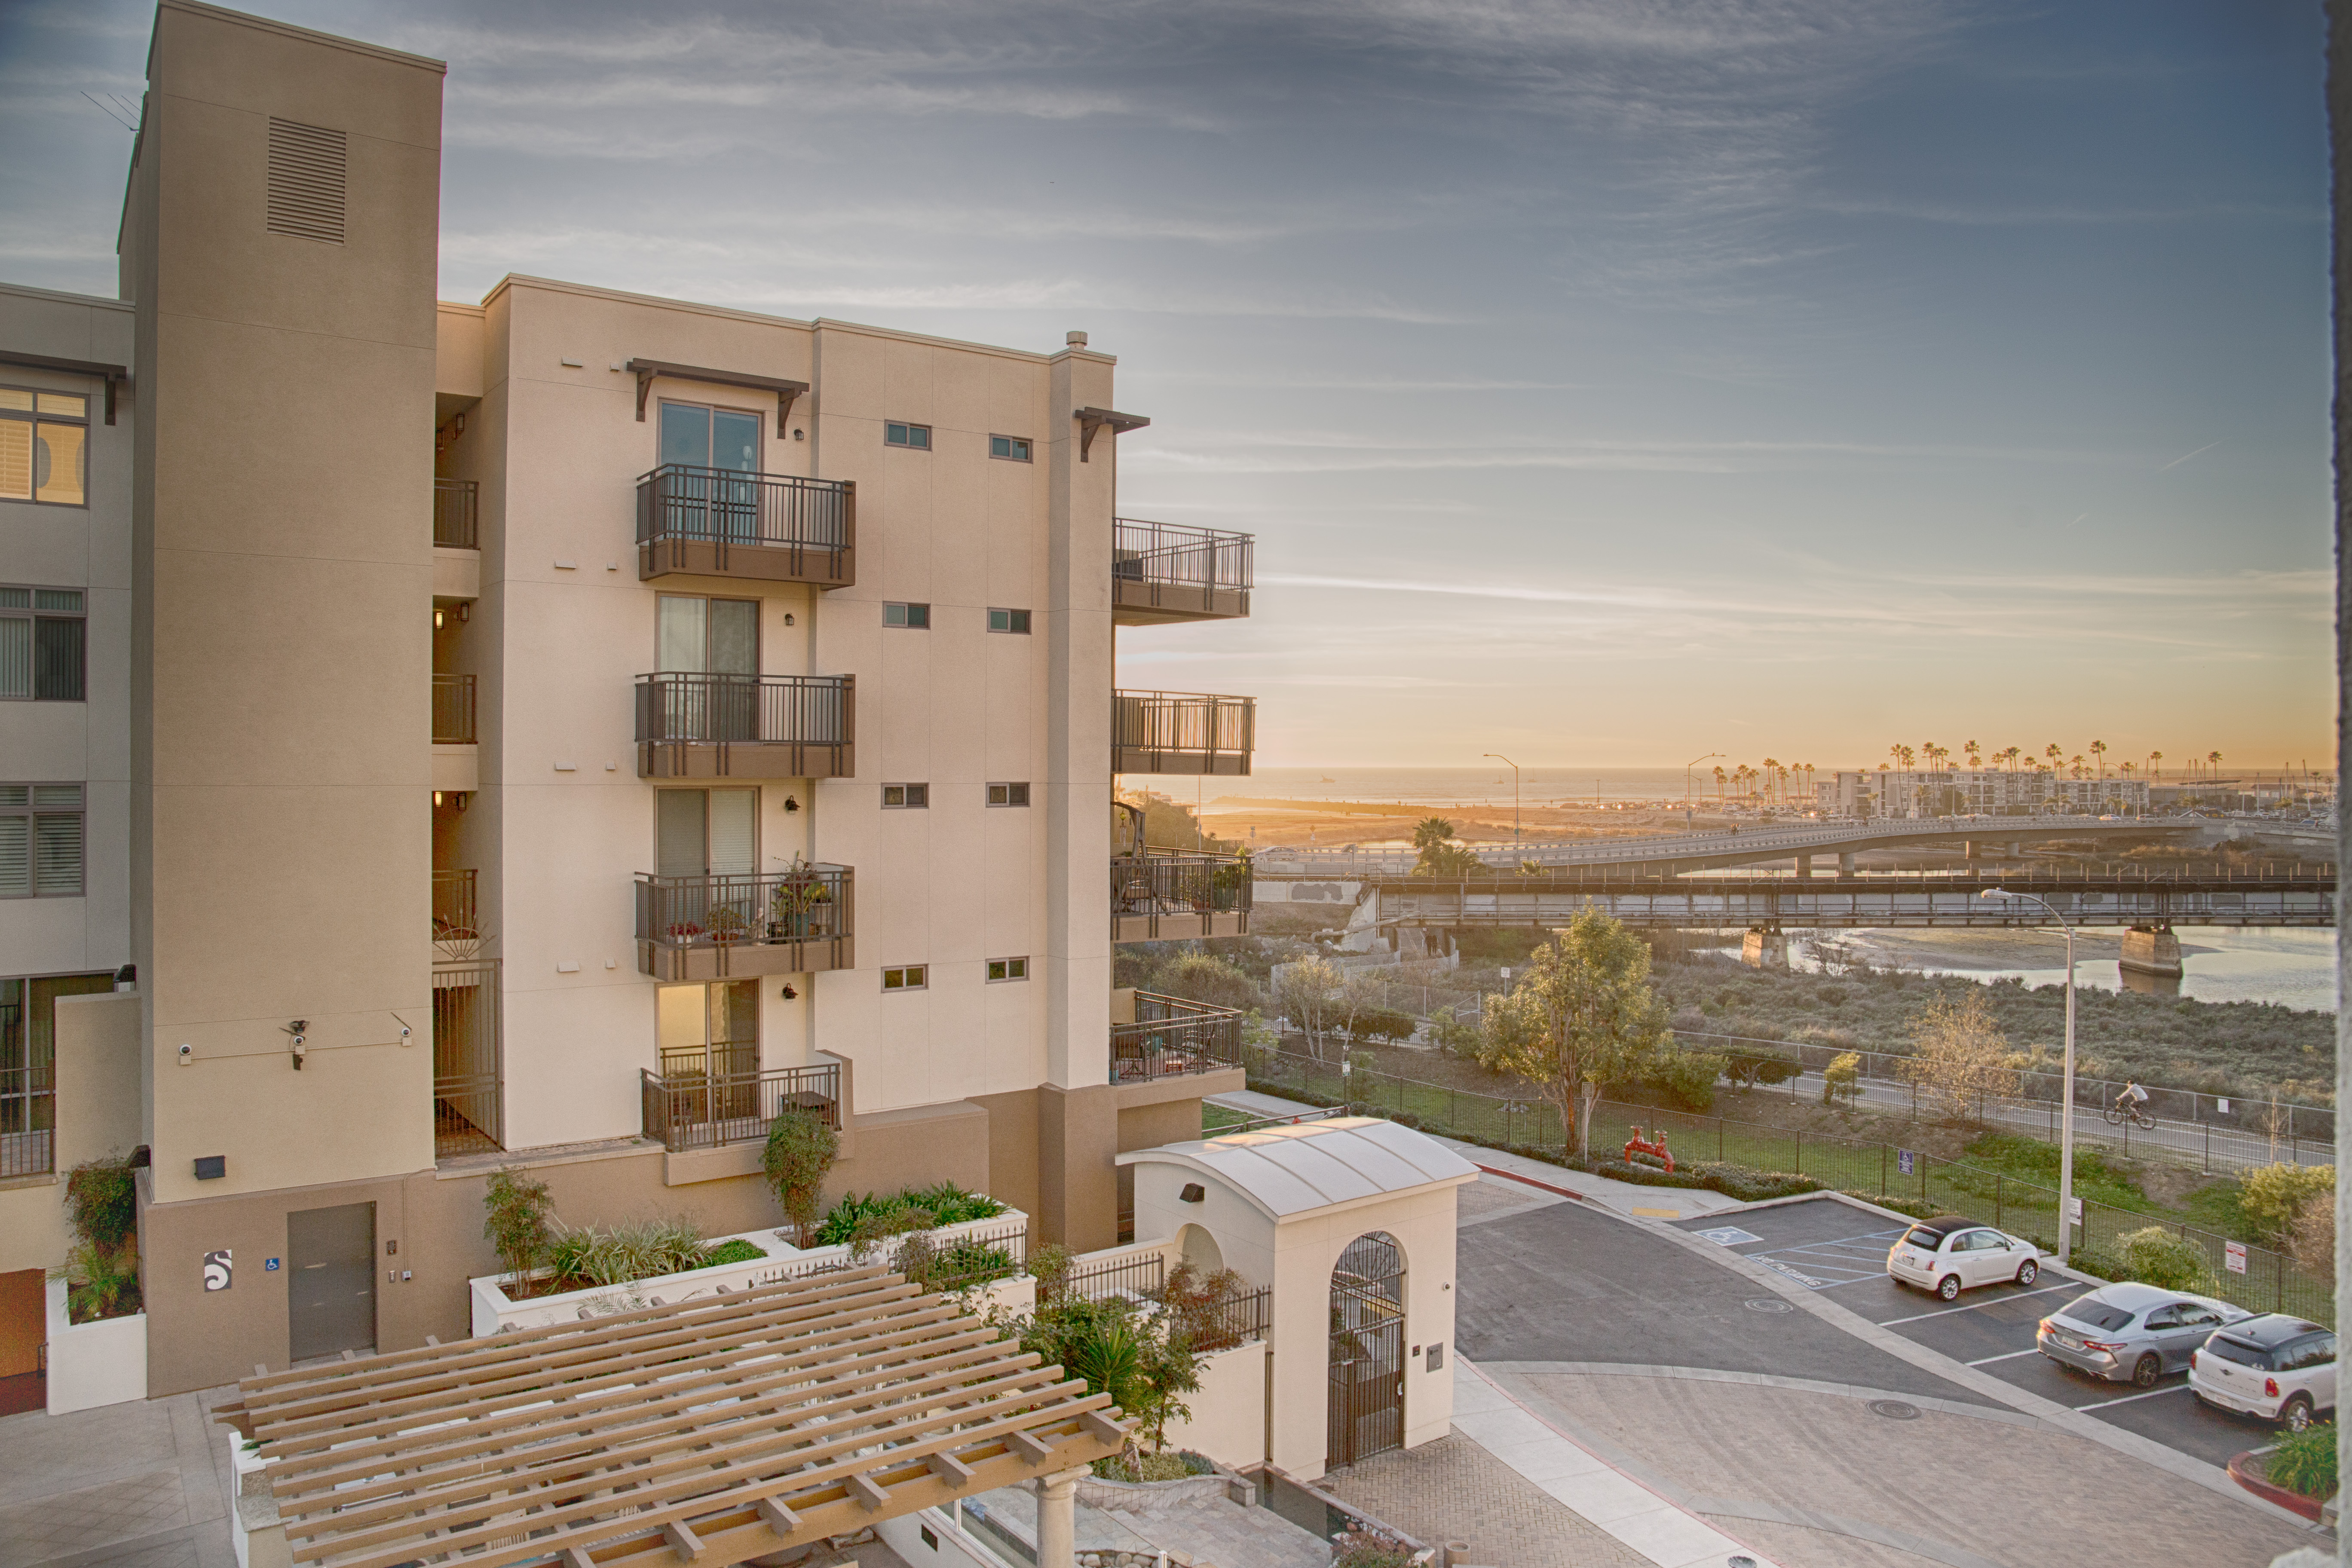 SOLD! Dreamy beach beauty by the sea! 1019 Costa Pacifica Way #1408 @ Oceanside